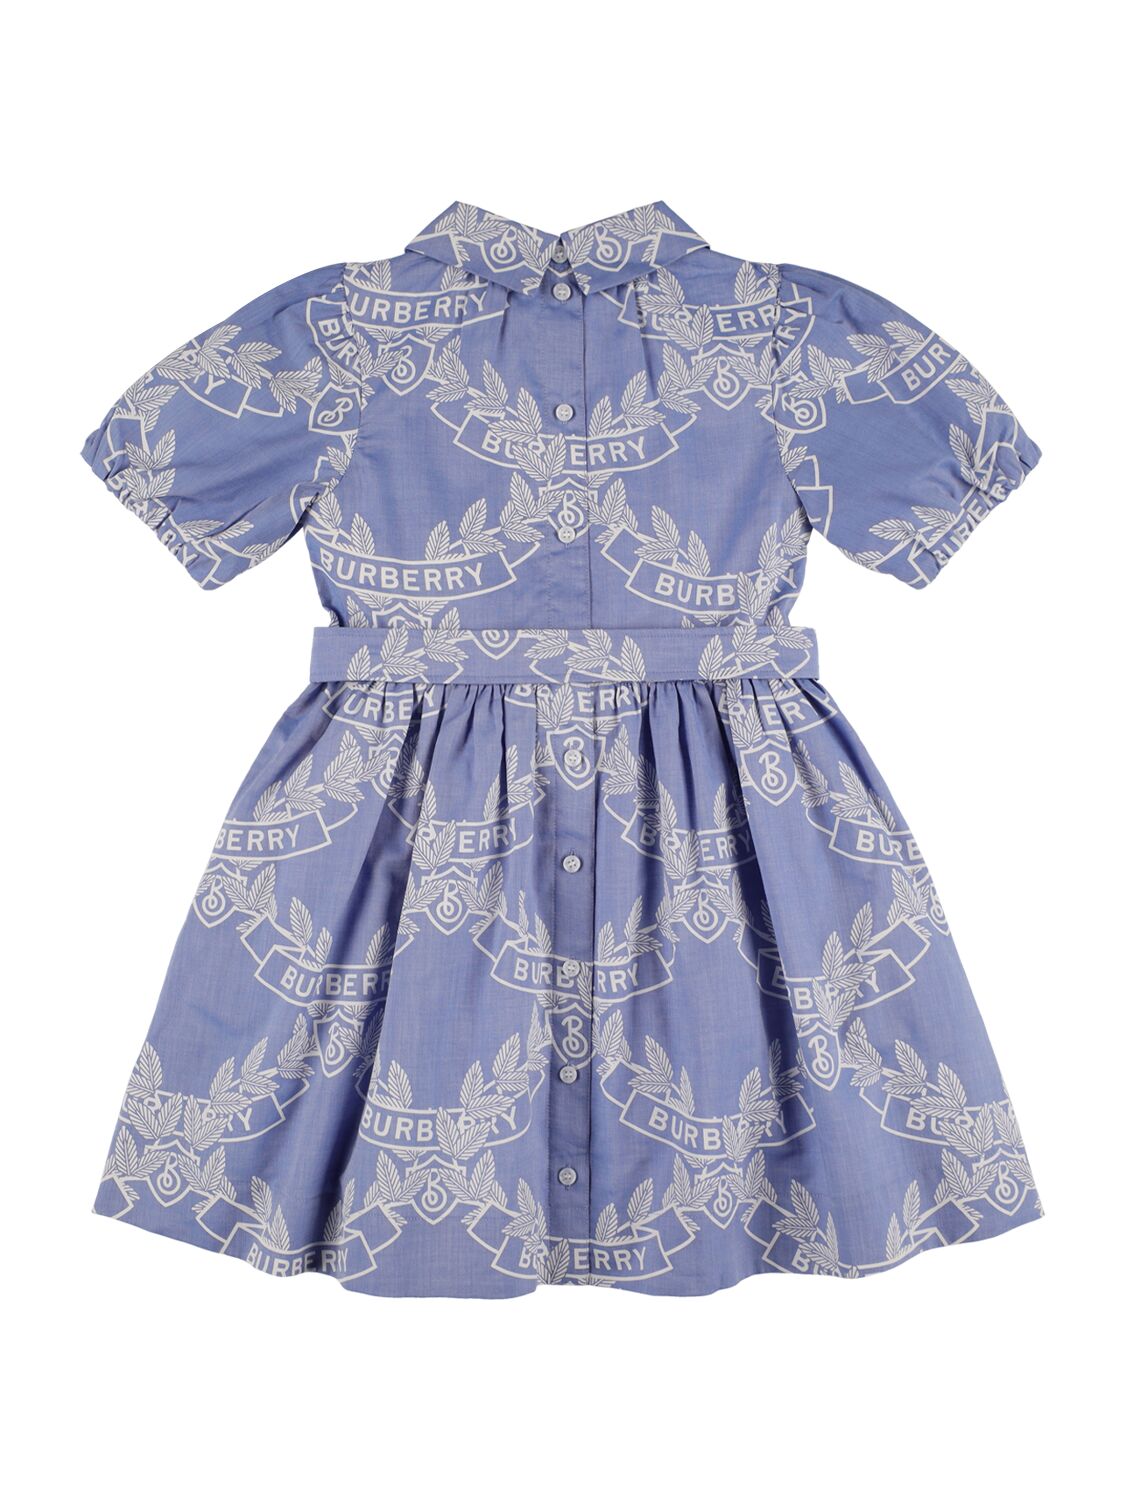 Shop Burberry Printed Cotton Dress W/ Puff Sleeves In Light Blue